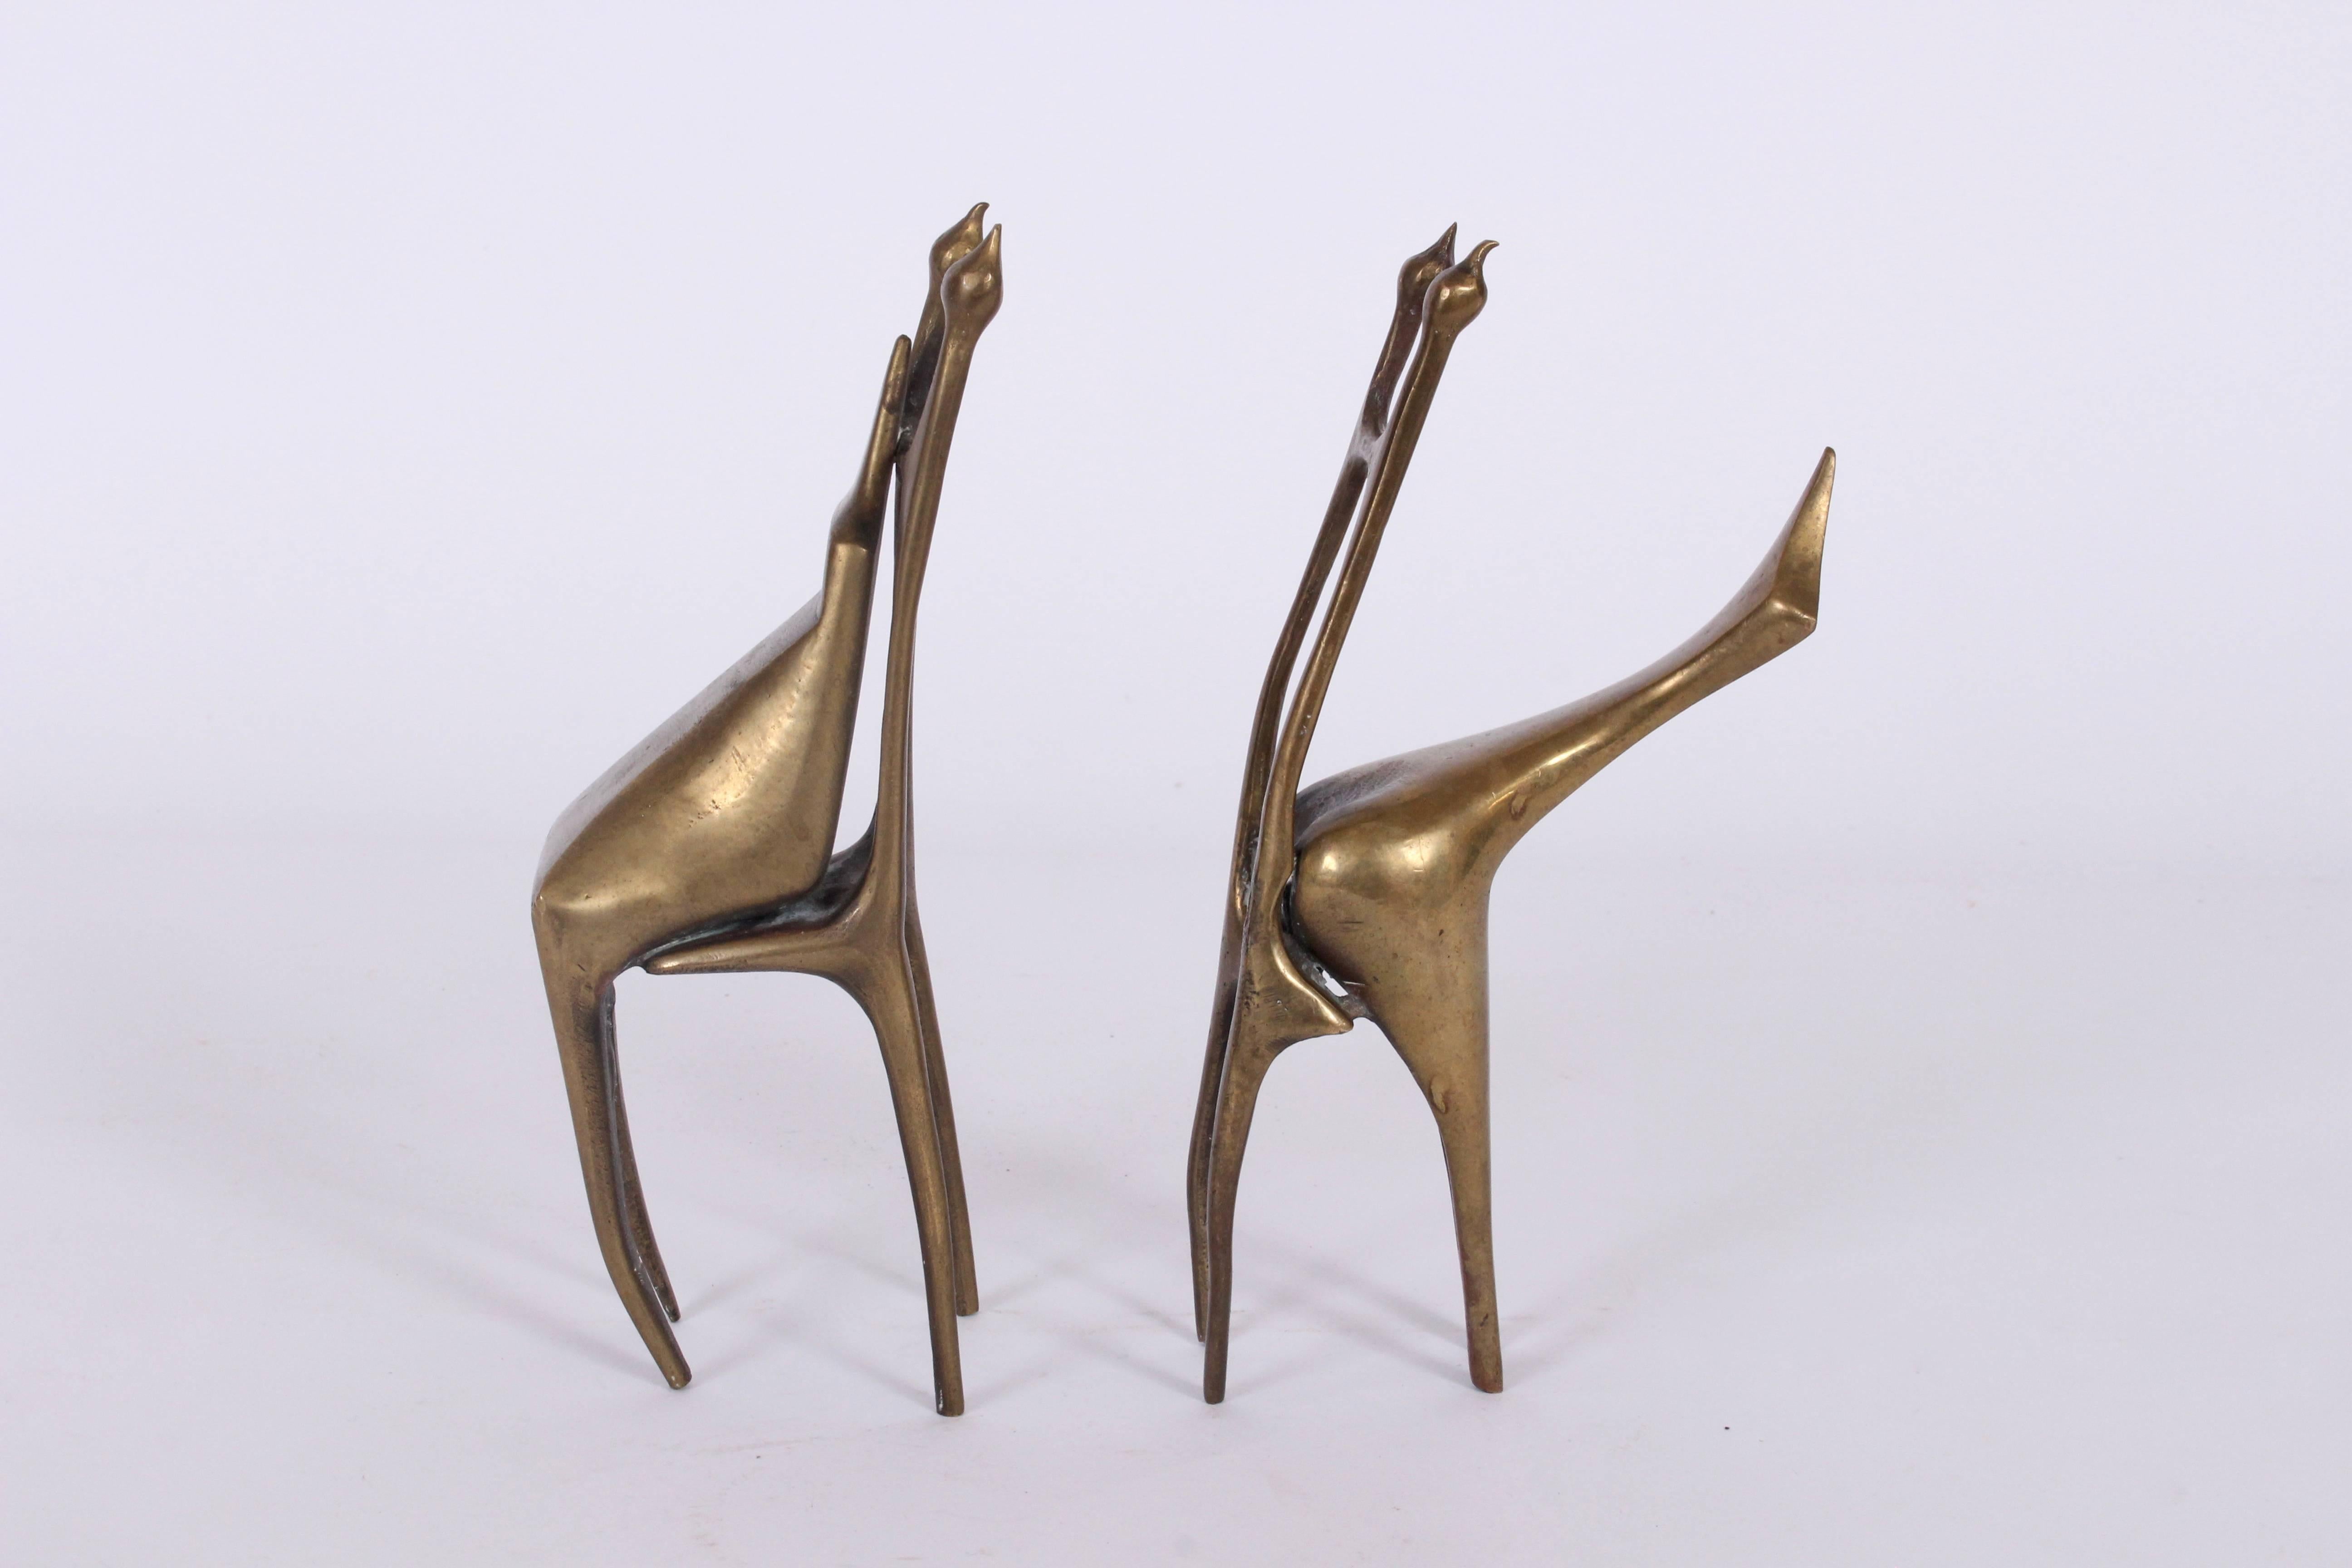 Smaller Post Surrealist. handcrafted studio solid bronze abstract sculptures. Featuring Modern handmade, balanced, chair like forms with seated, leaning figures. Versatile. Bookshelf. Mantle. Signed AB 1977 3/9. Three in series of nine. 